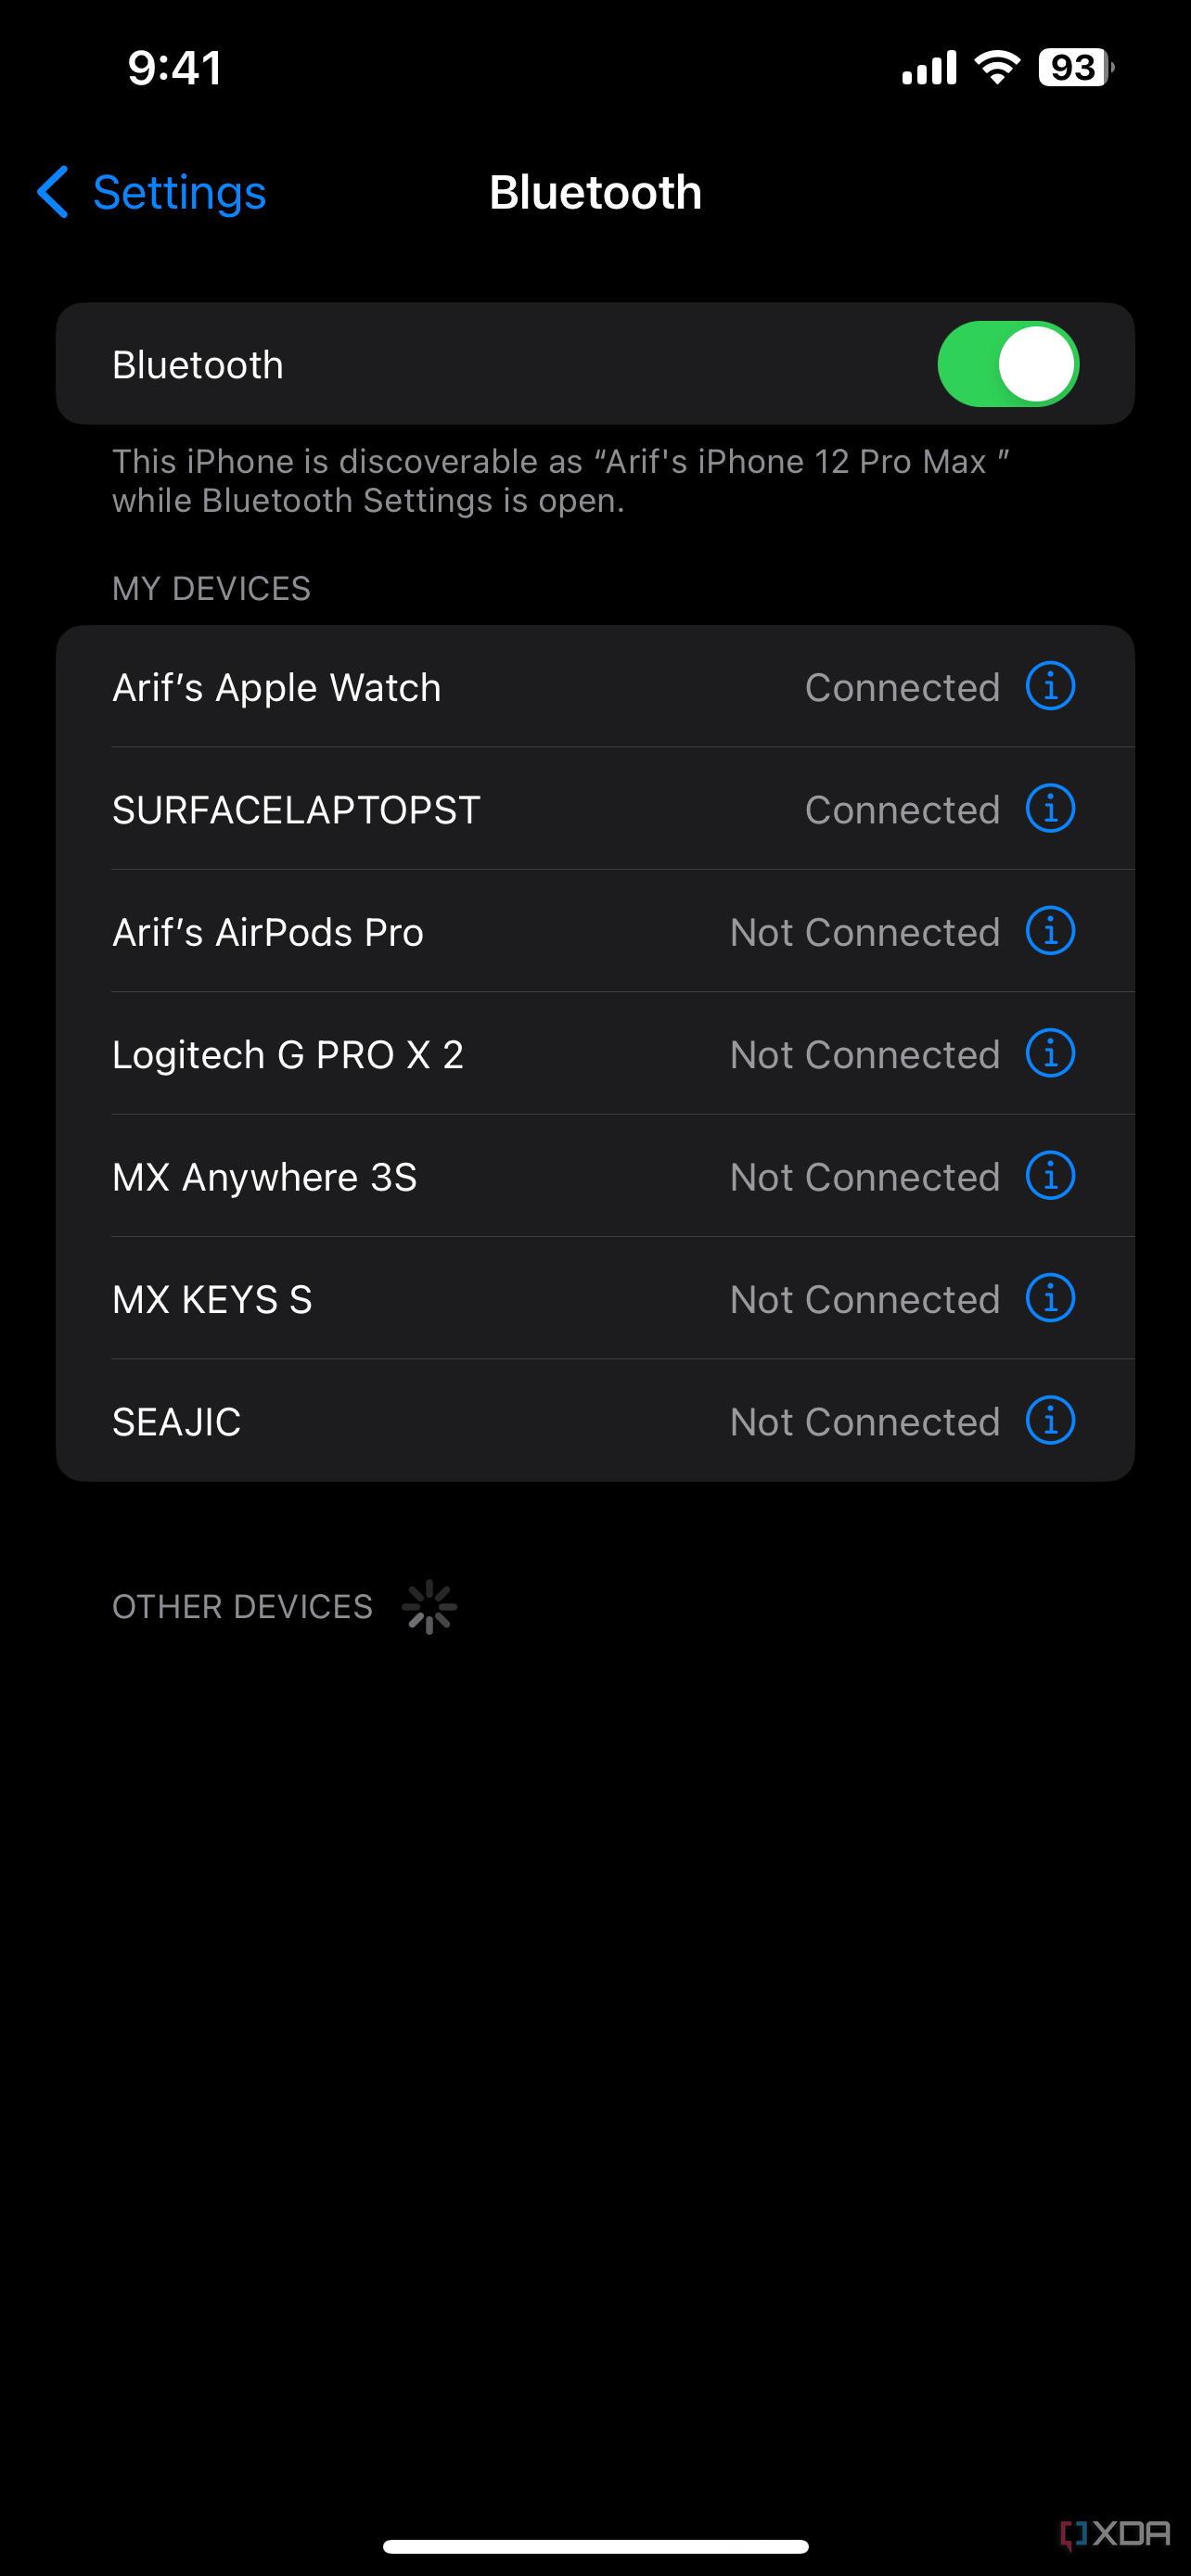 A screenshot of the Bluetooth settings page for iPhone listing Bluetooth devices